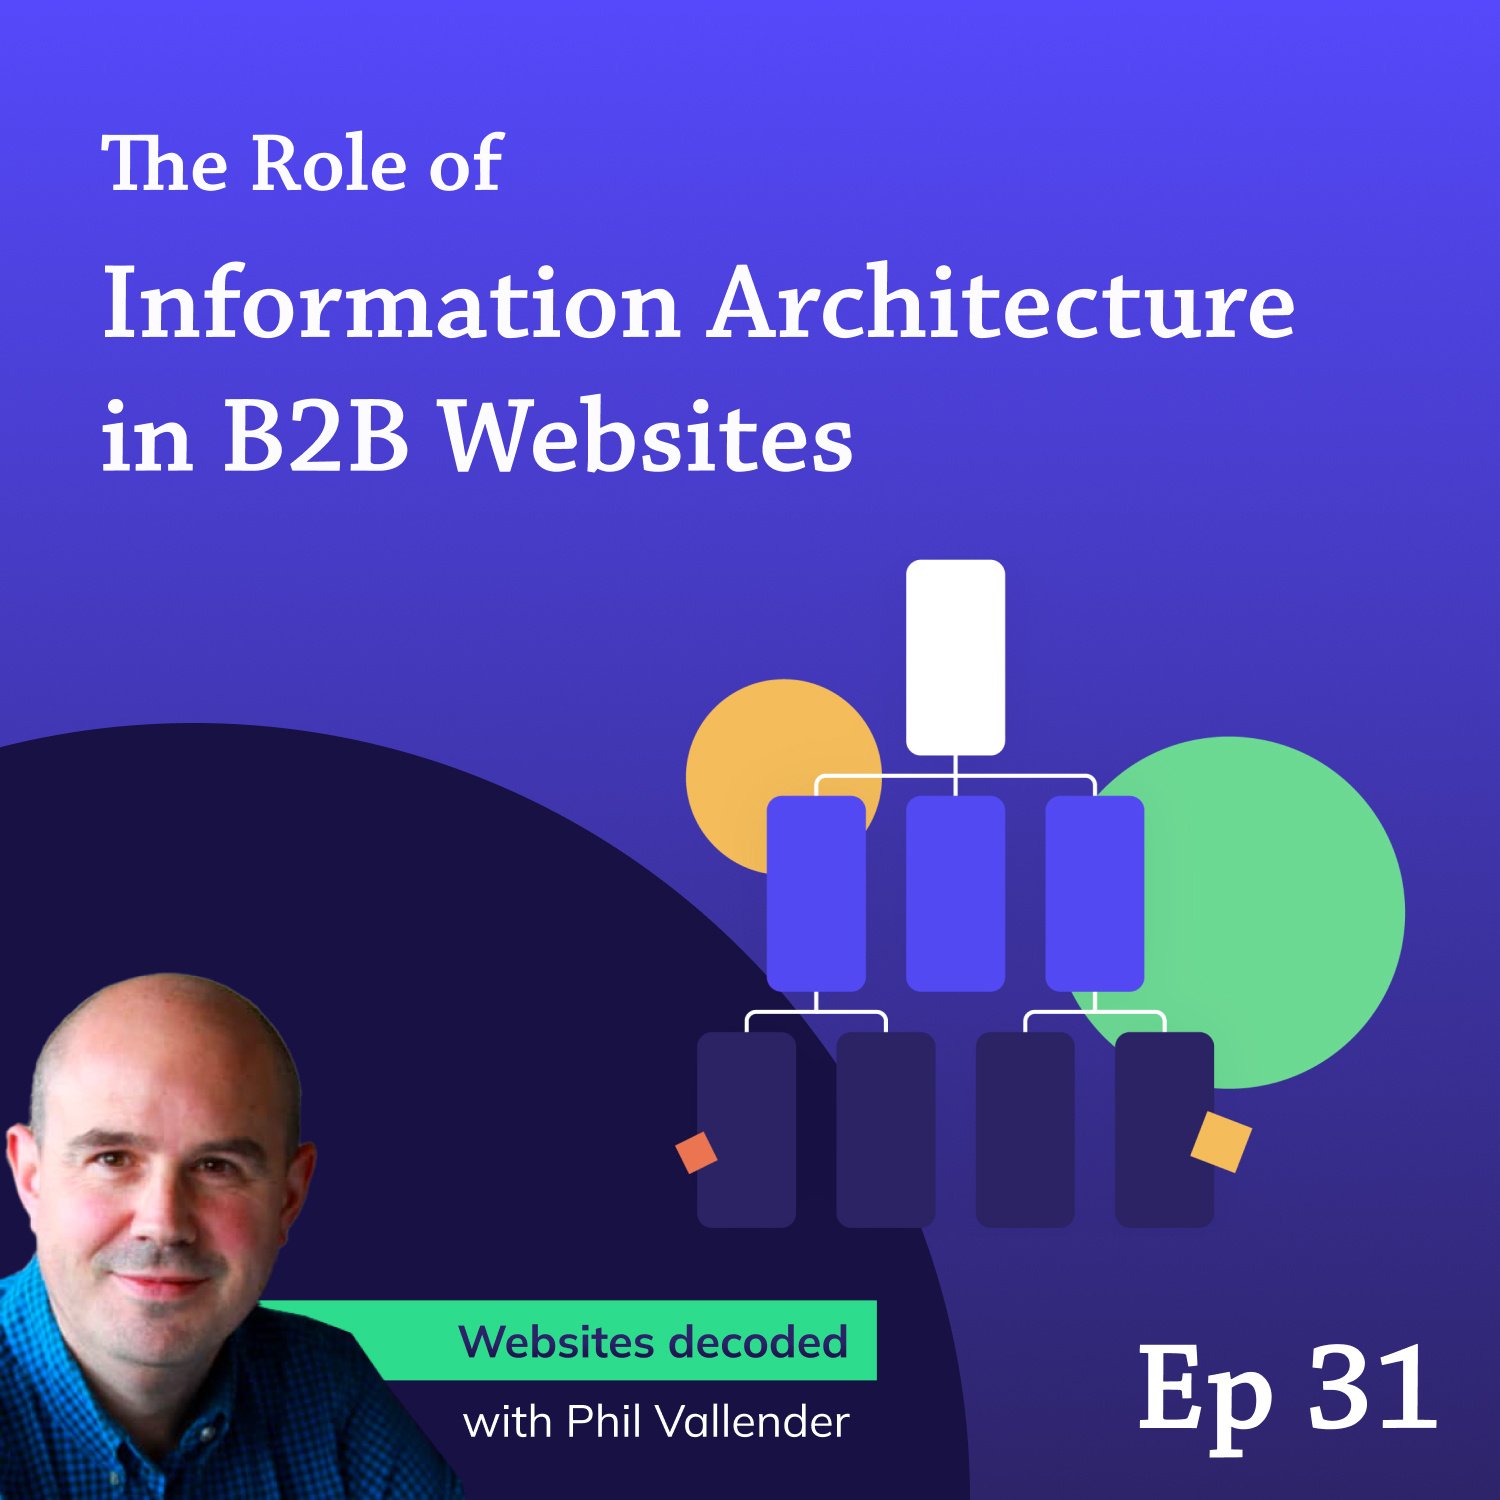 The Role of Information Architecture in B2B Websites